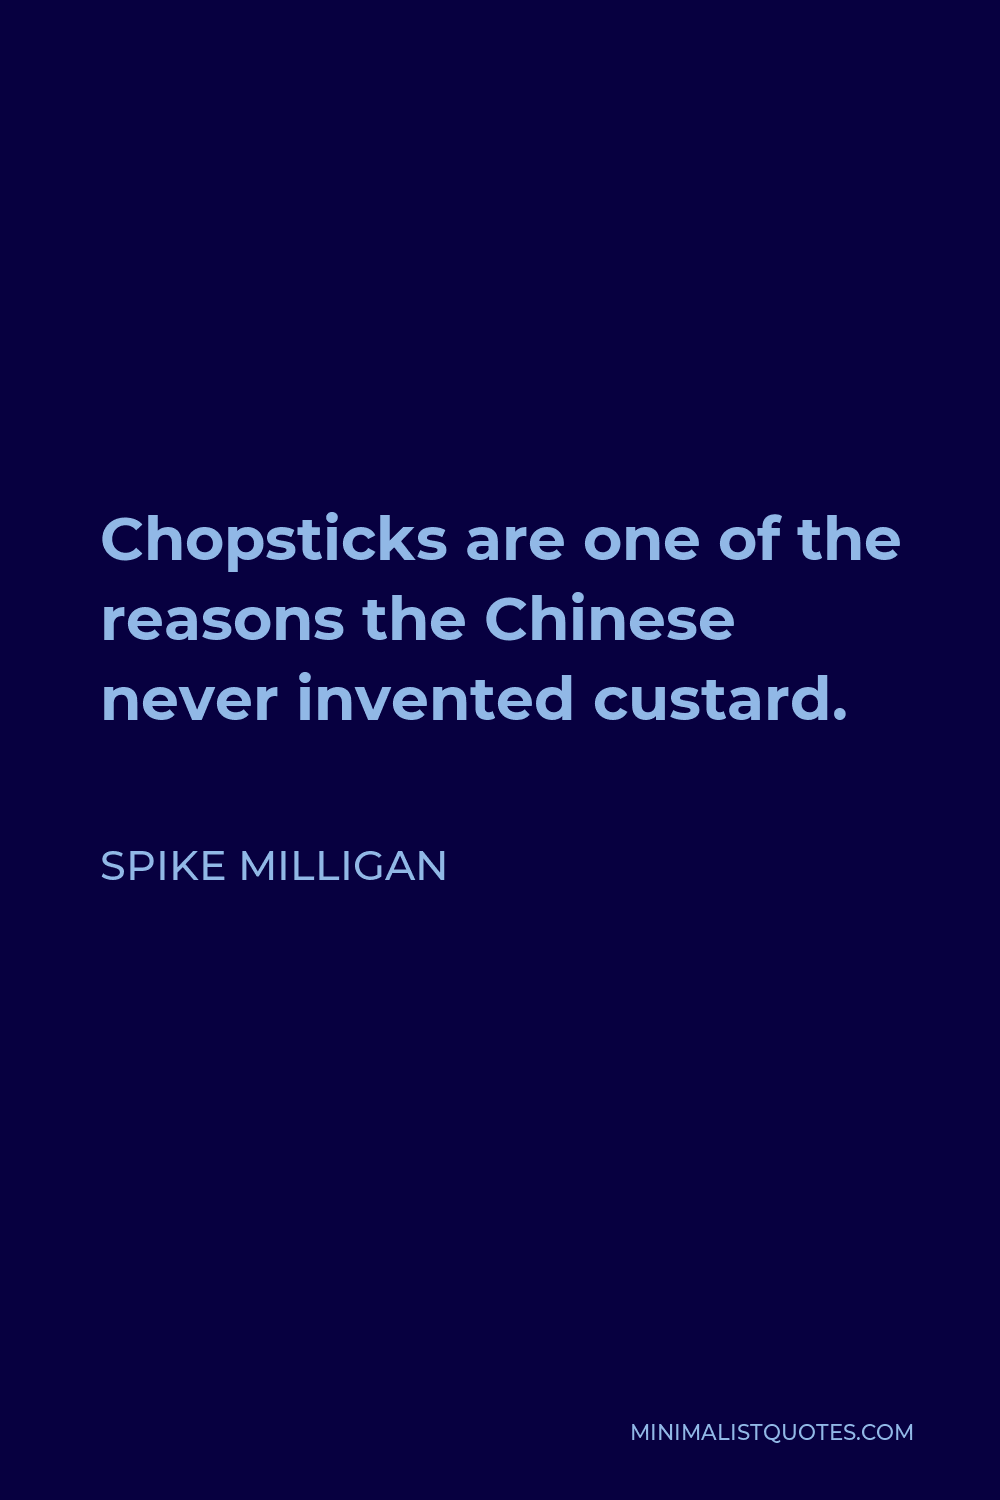 Spike Milligan Quote - Chopsticks are one of the reasons the Chinese never invented custard.